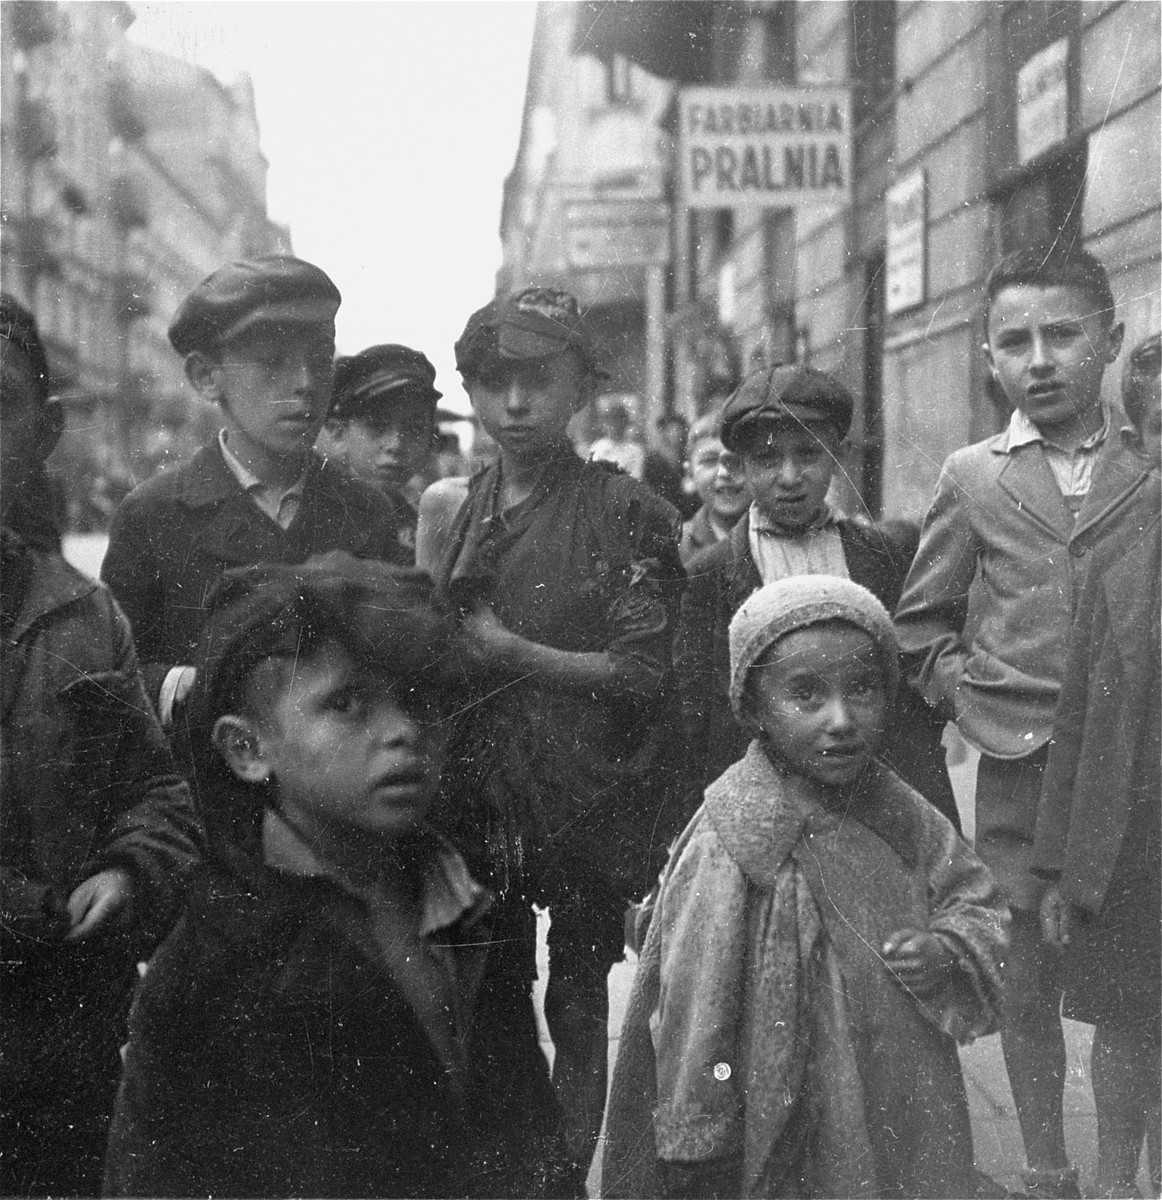 Children on the street in the Warsaw ghetto.  

Joest's original caption reads: "The hunger and misery of most of the children one saw showed more in their clothing than in their faces."